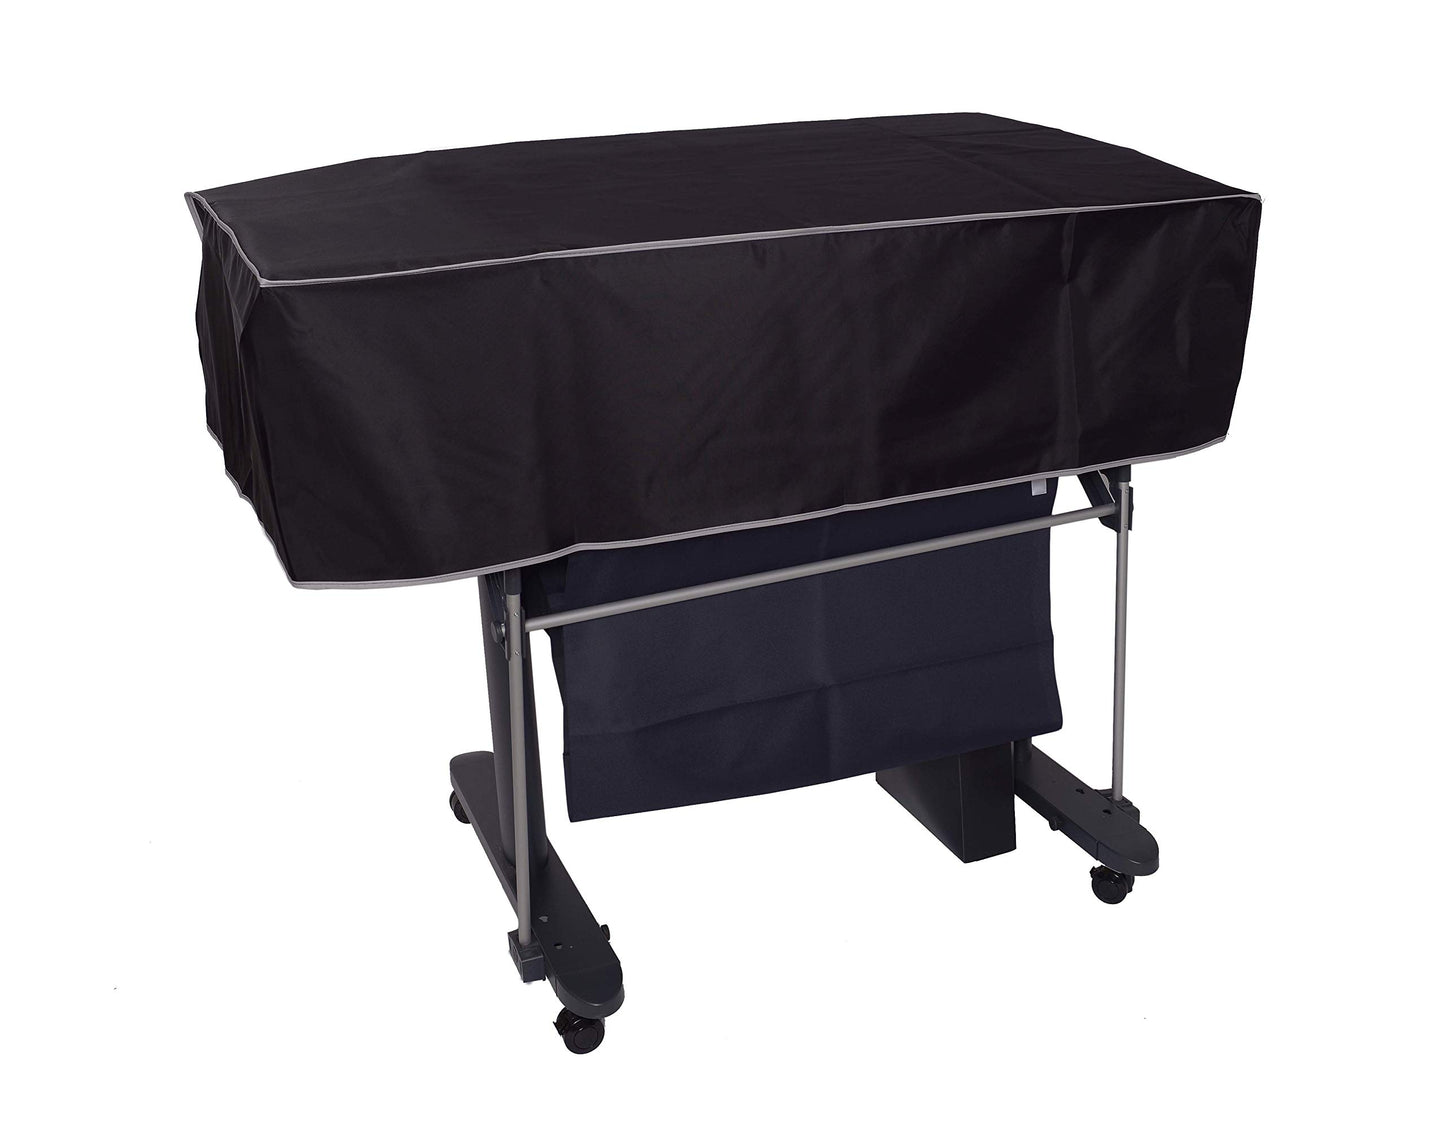 The Perfect Dust Cover, Black Nylon Short Cover for HP DesignJet T520, DesignJet T525 and DesignJet T530 36-in Wide Format Printers, Anti Static and Waterproof by The Perfect Dust Cover LLC